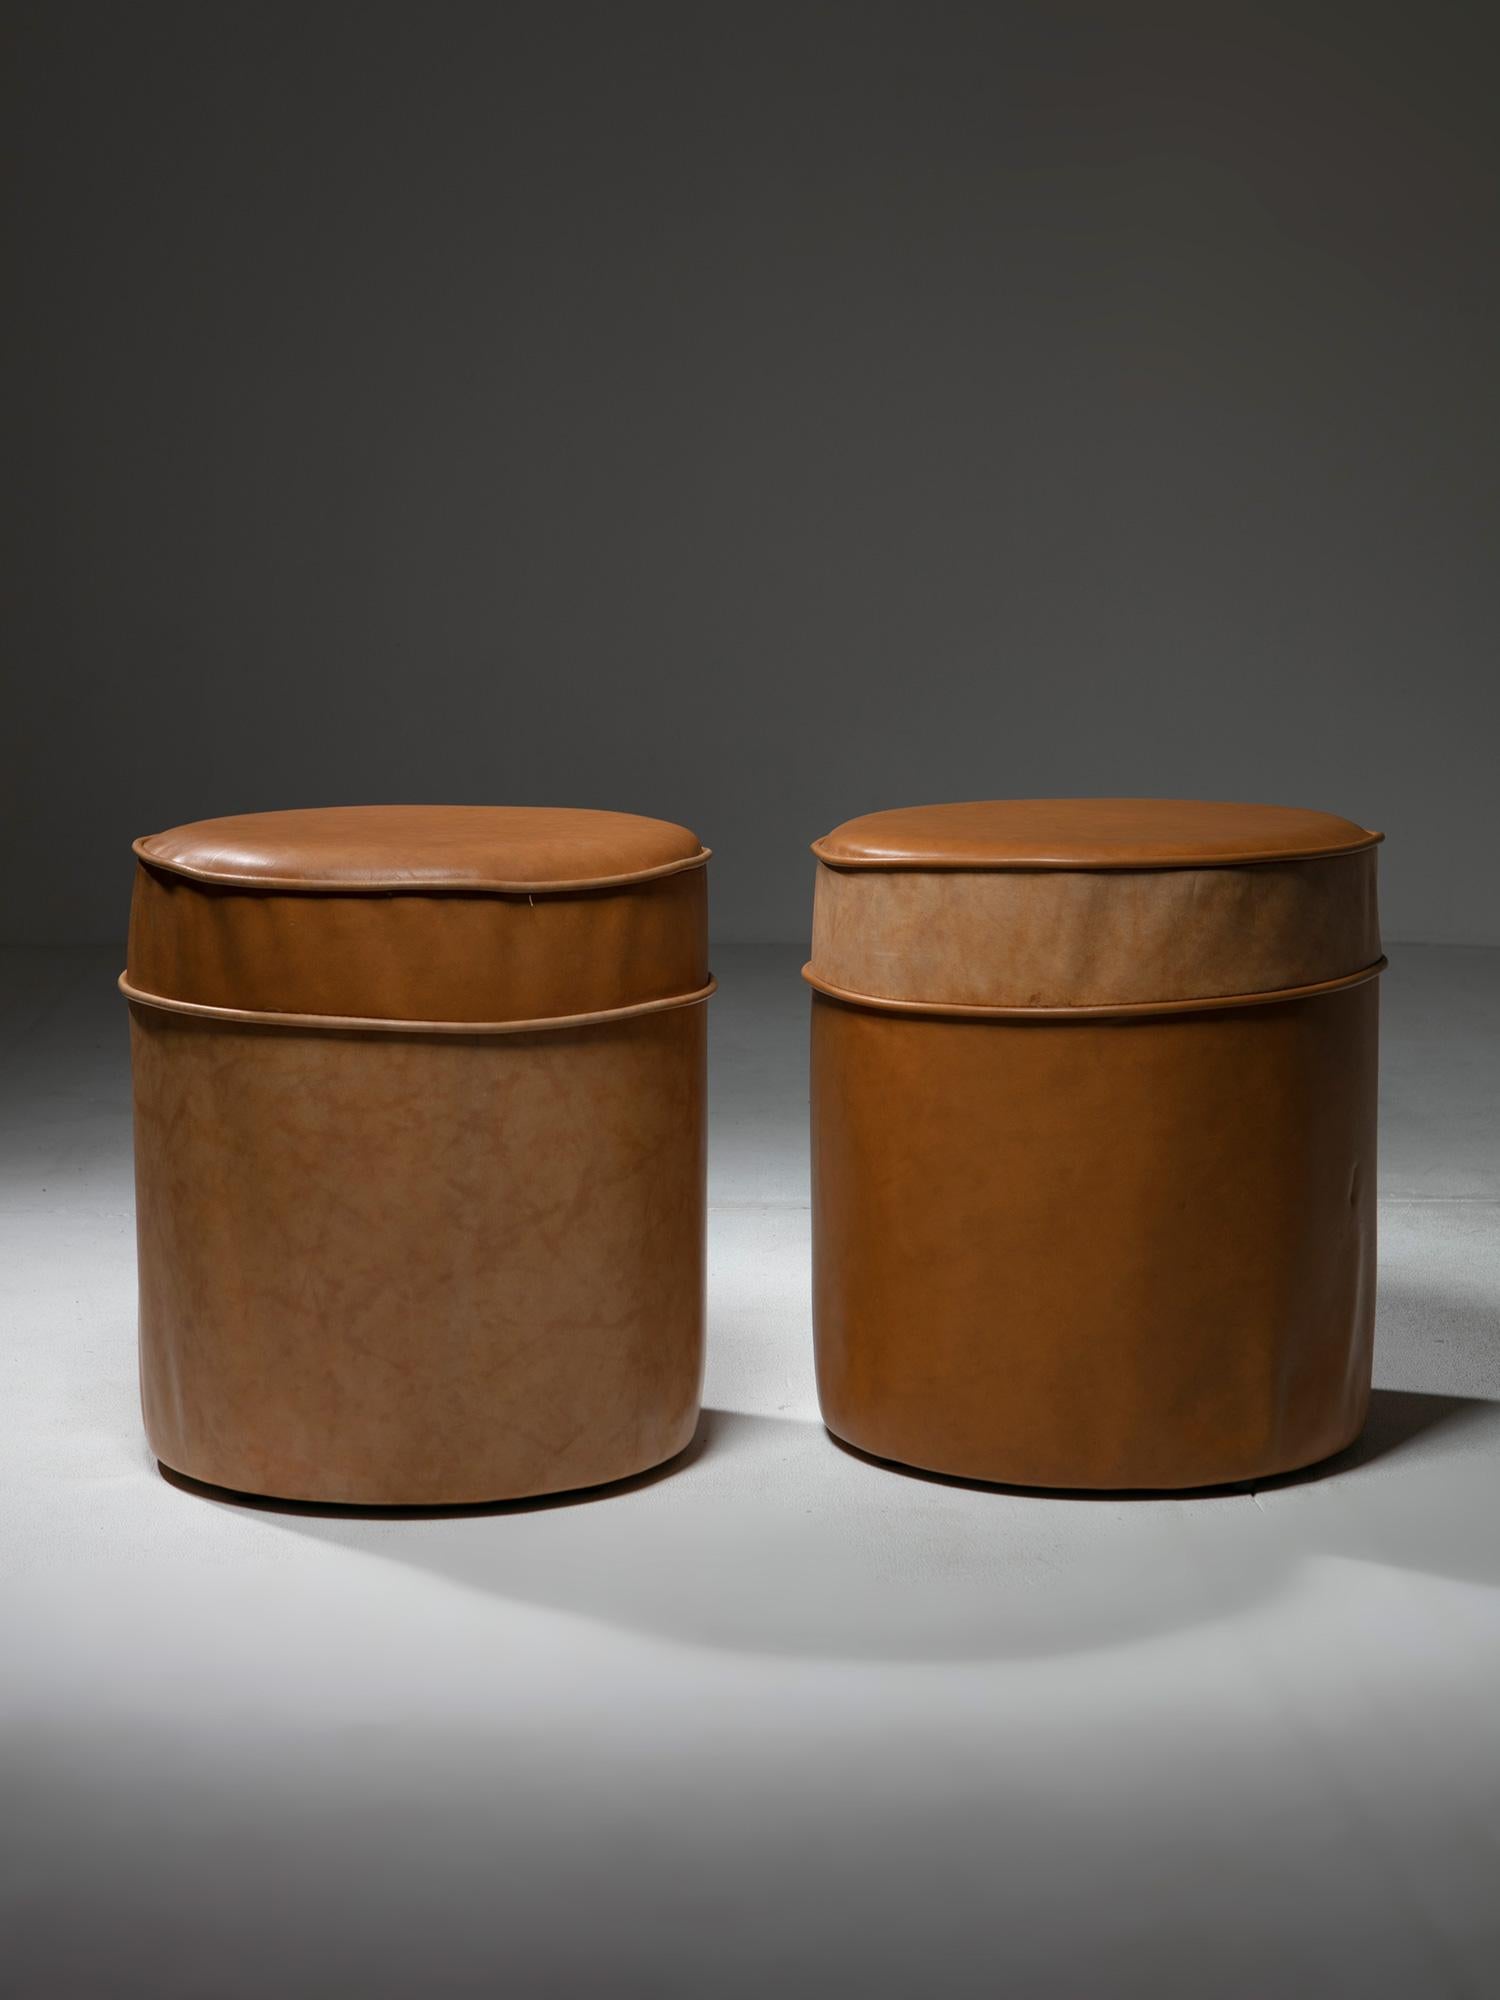 Set of Four Round Leather Stools, Italy, 1970s For Sale 2